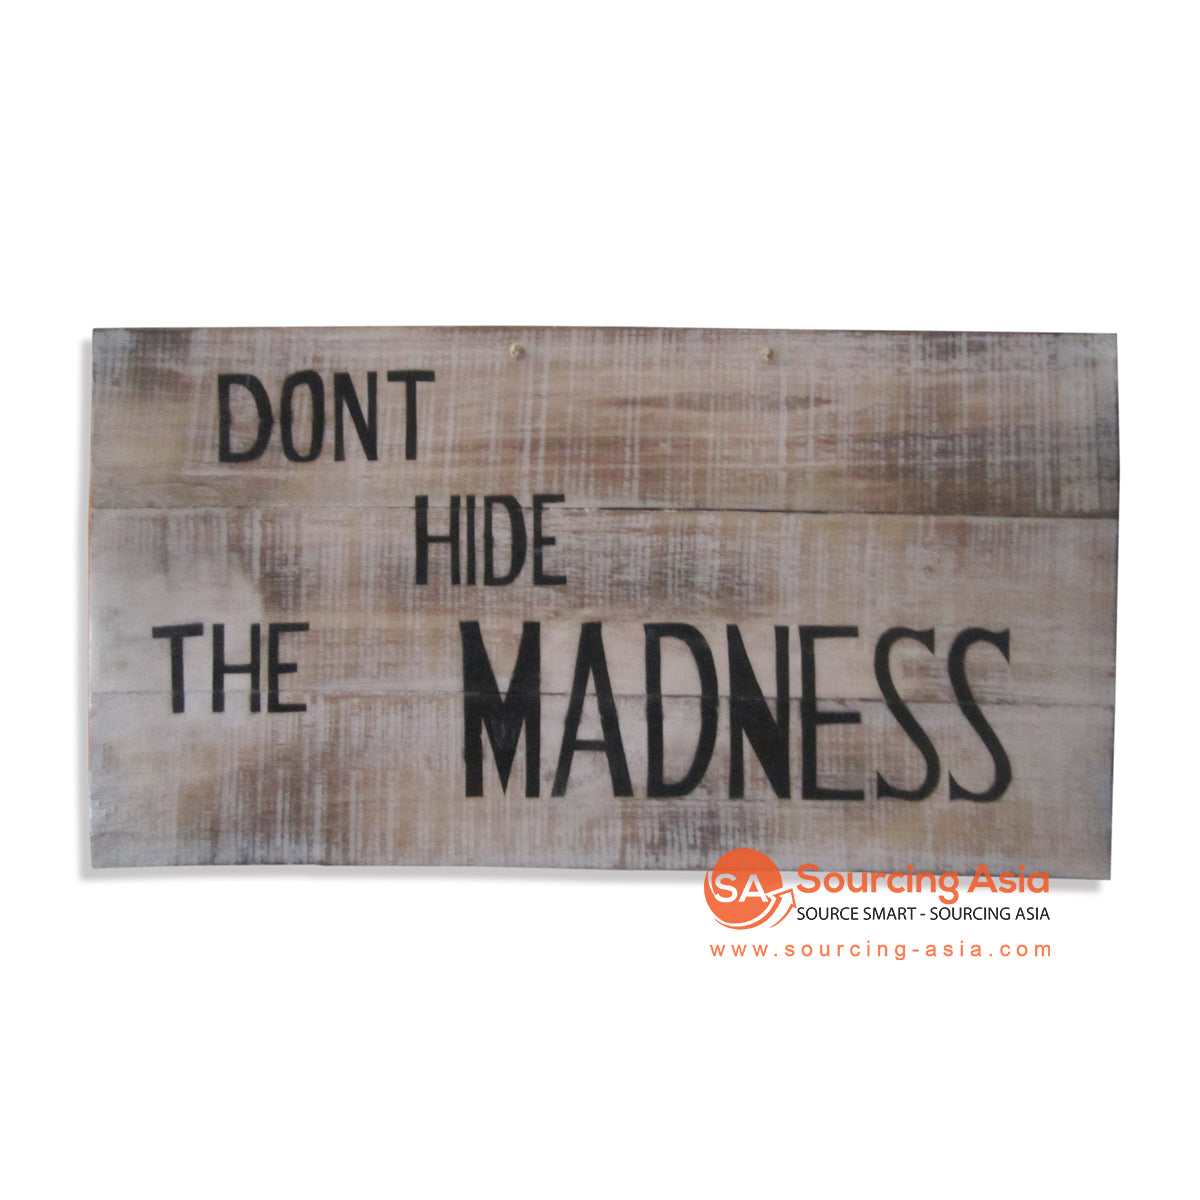 LSA07C WOODEN "DONT HIDE THE MADNESS" WALL SIGN BOARD